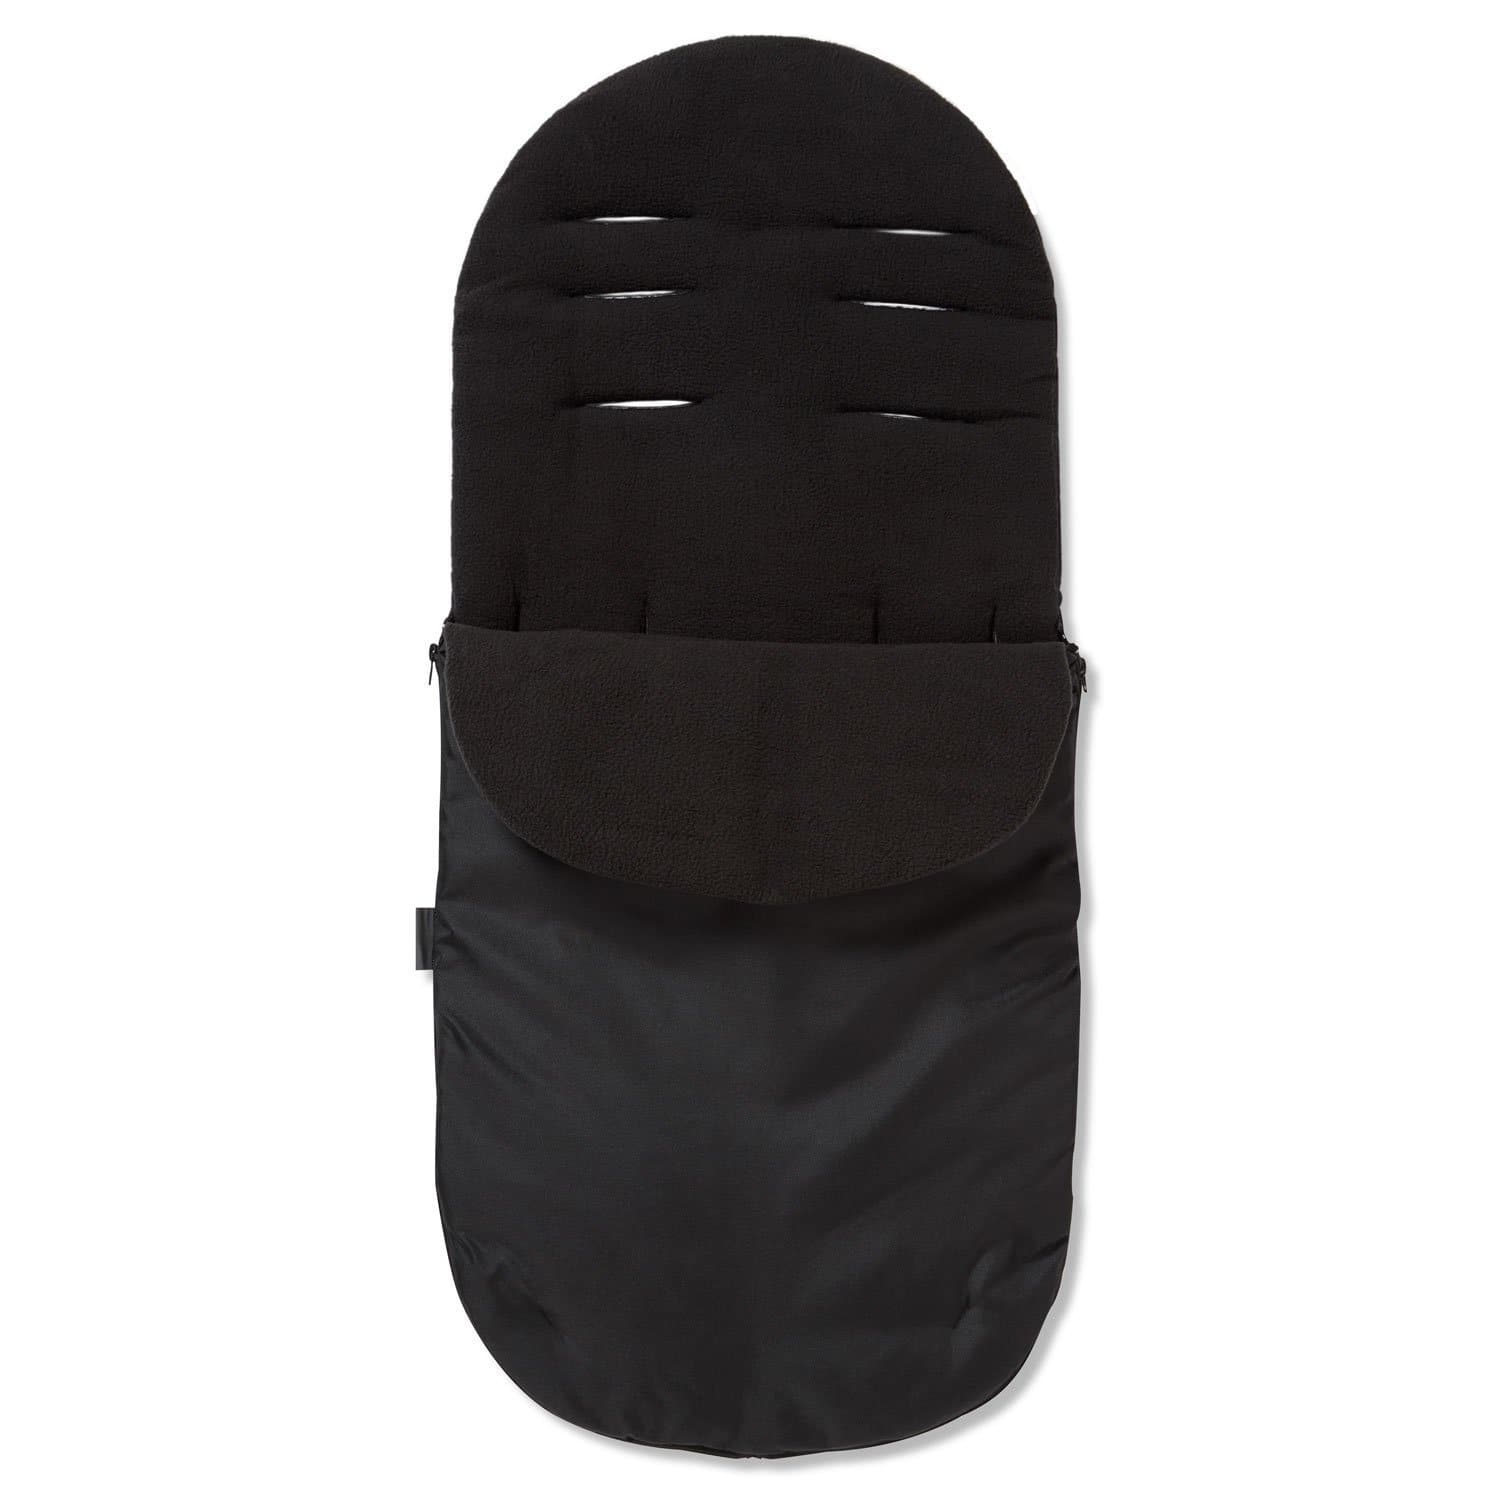 Footmuff / Cosy Toes Compatible with Cybex - Black / Fits All Models | For Your Little One